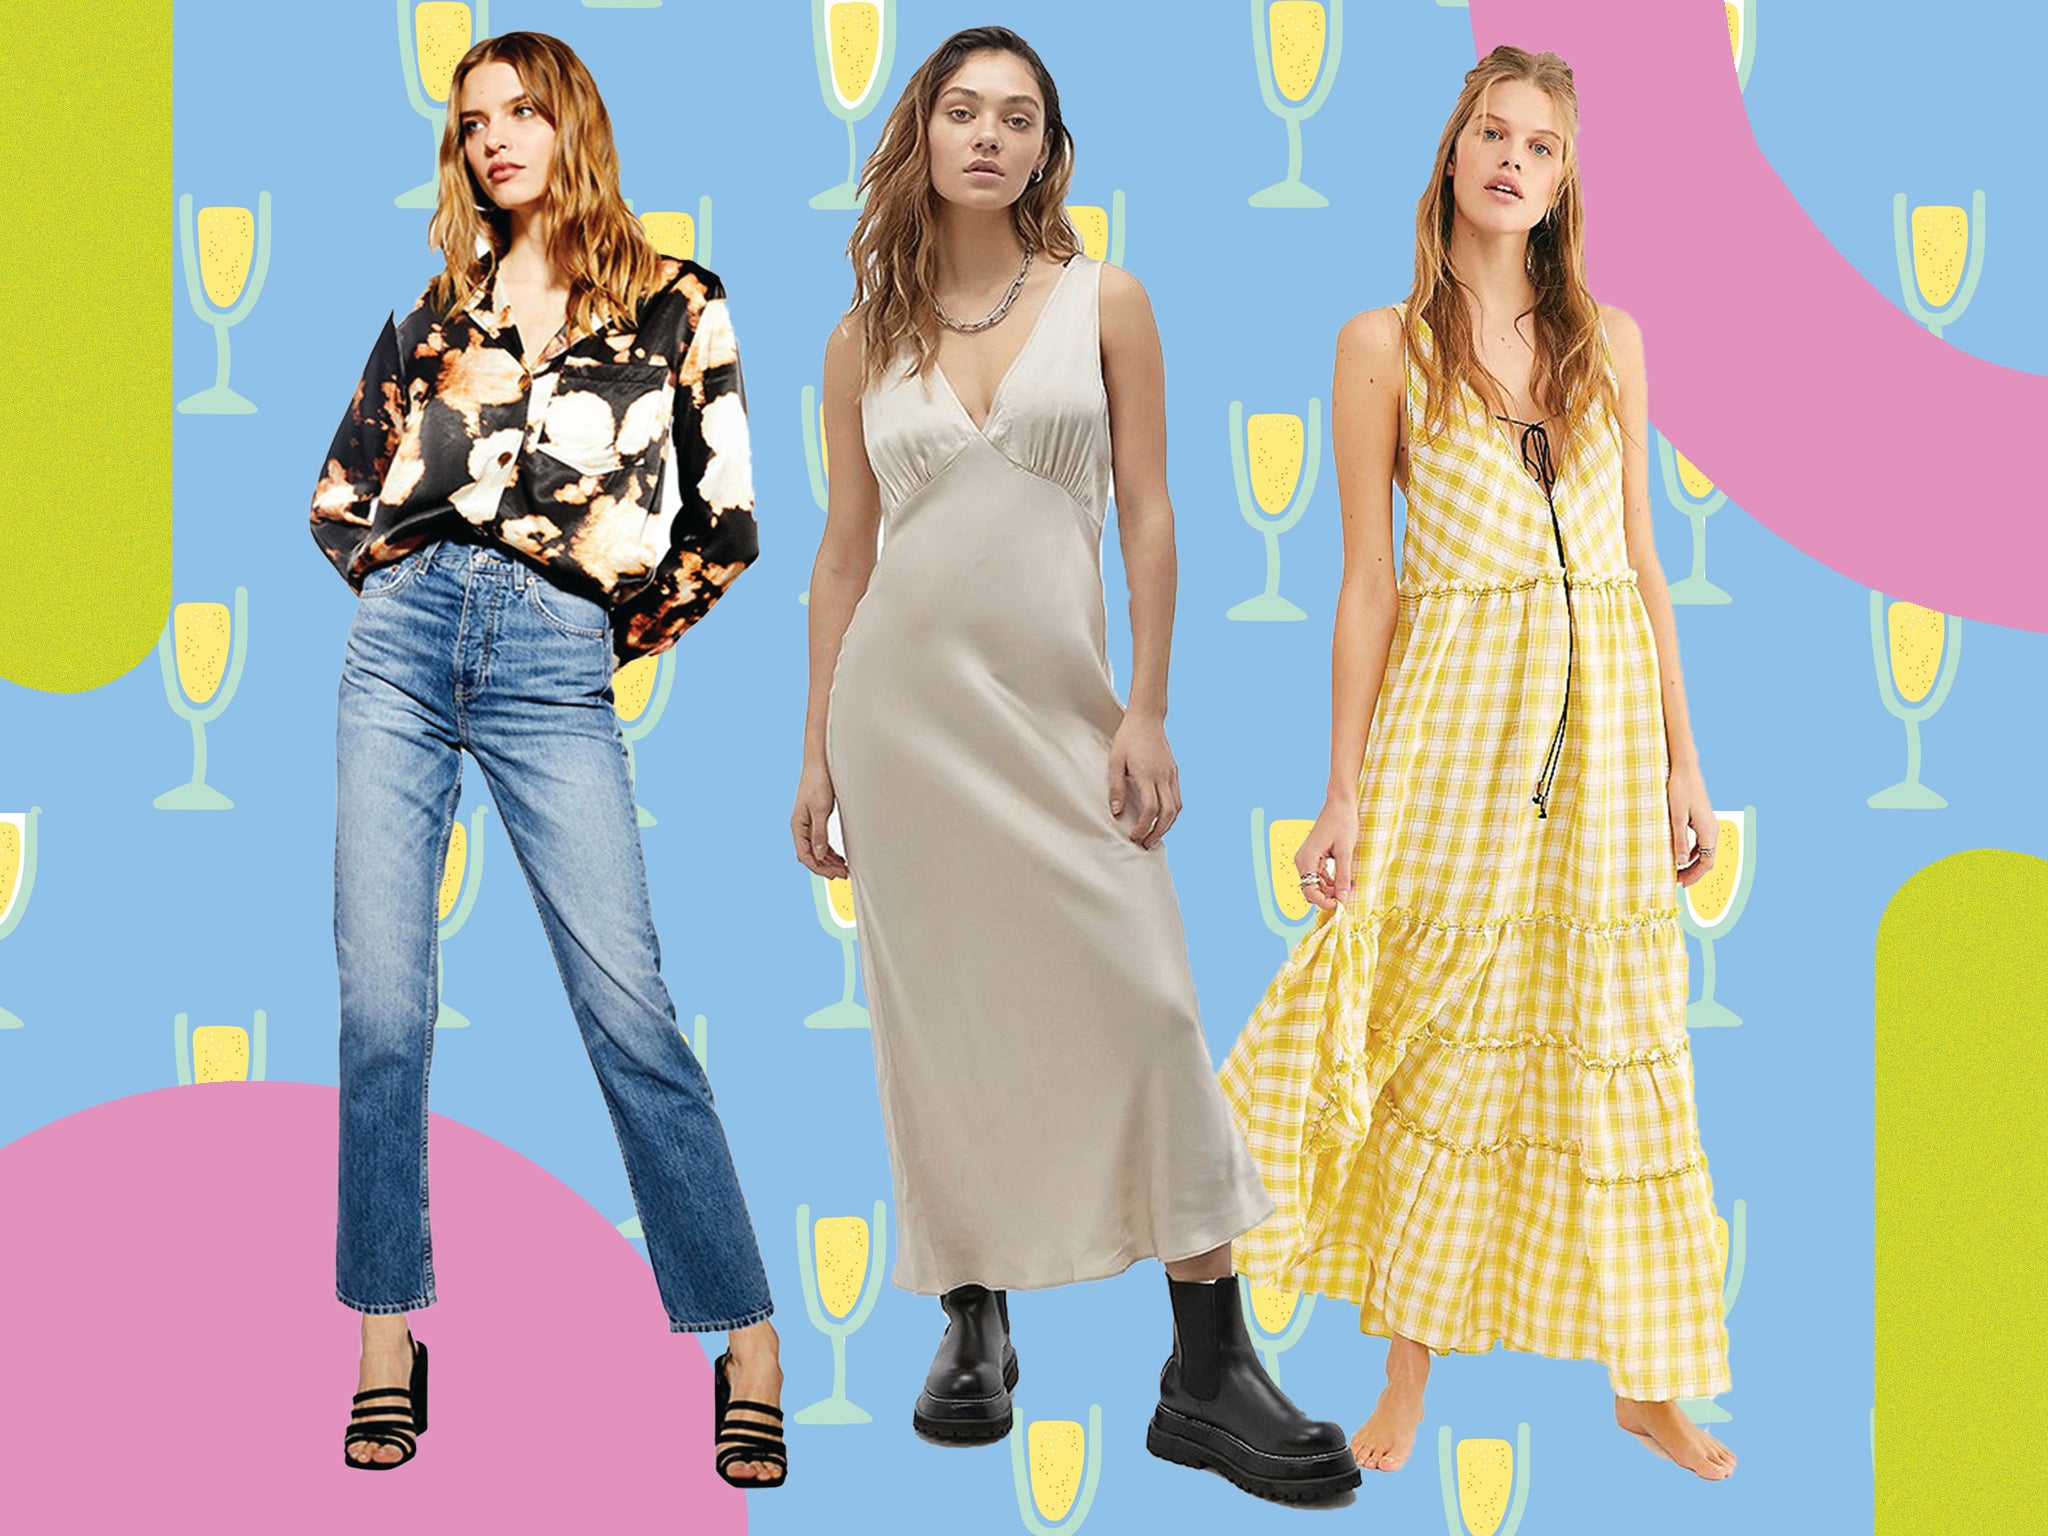 We've found the outfits that are the sartorial equivalent to a cold pint at the pub